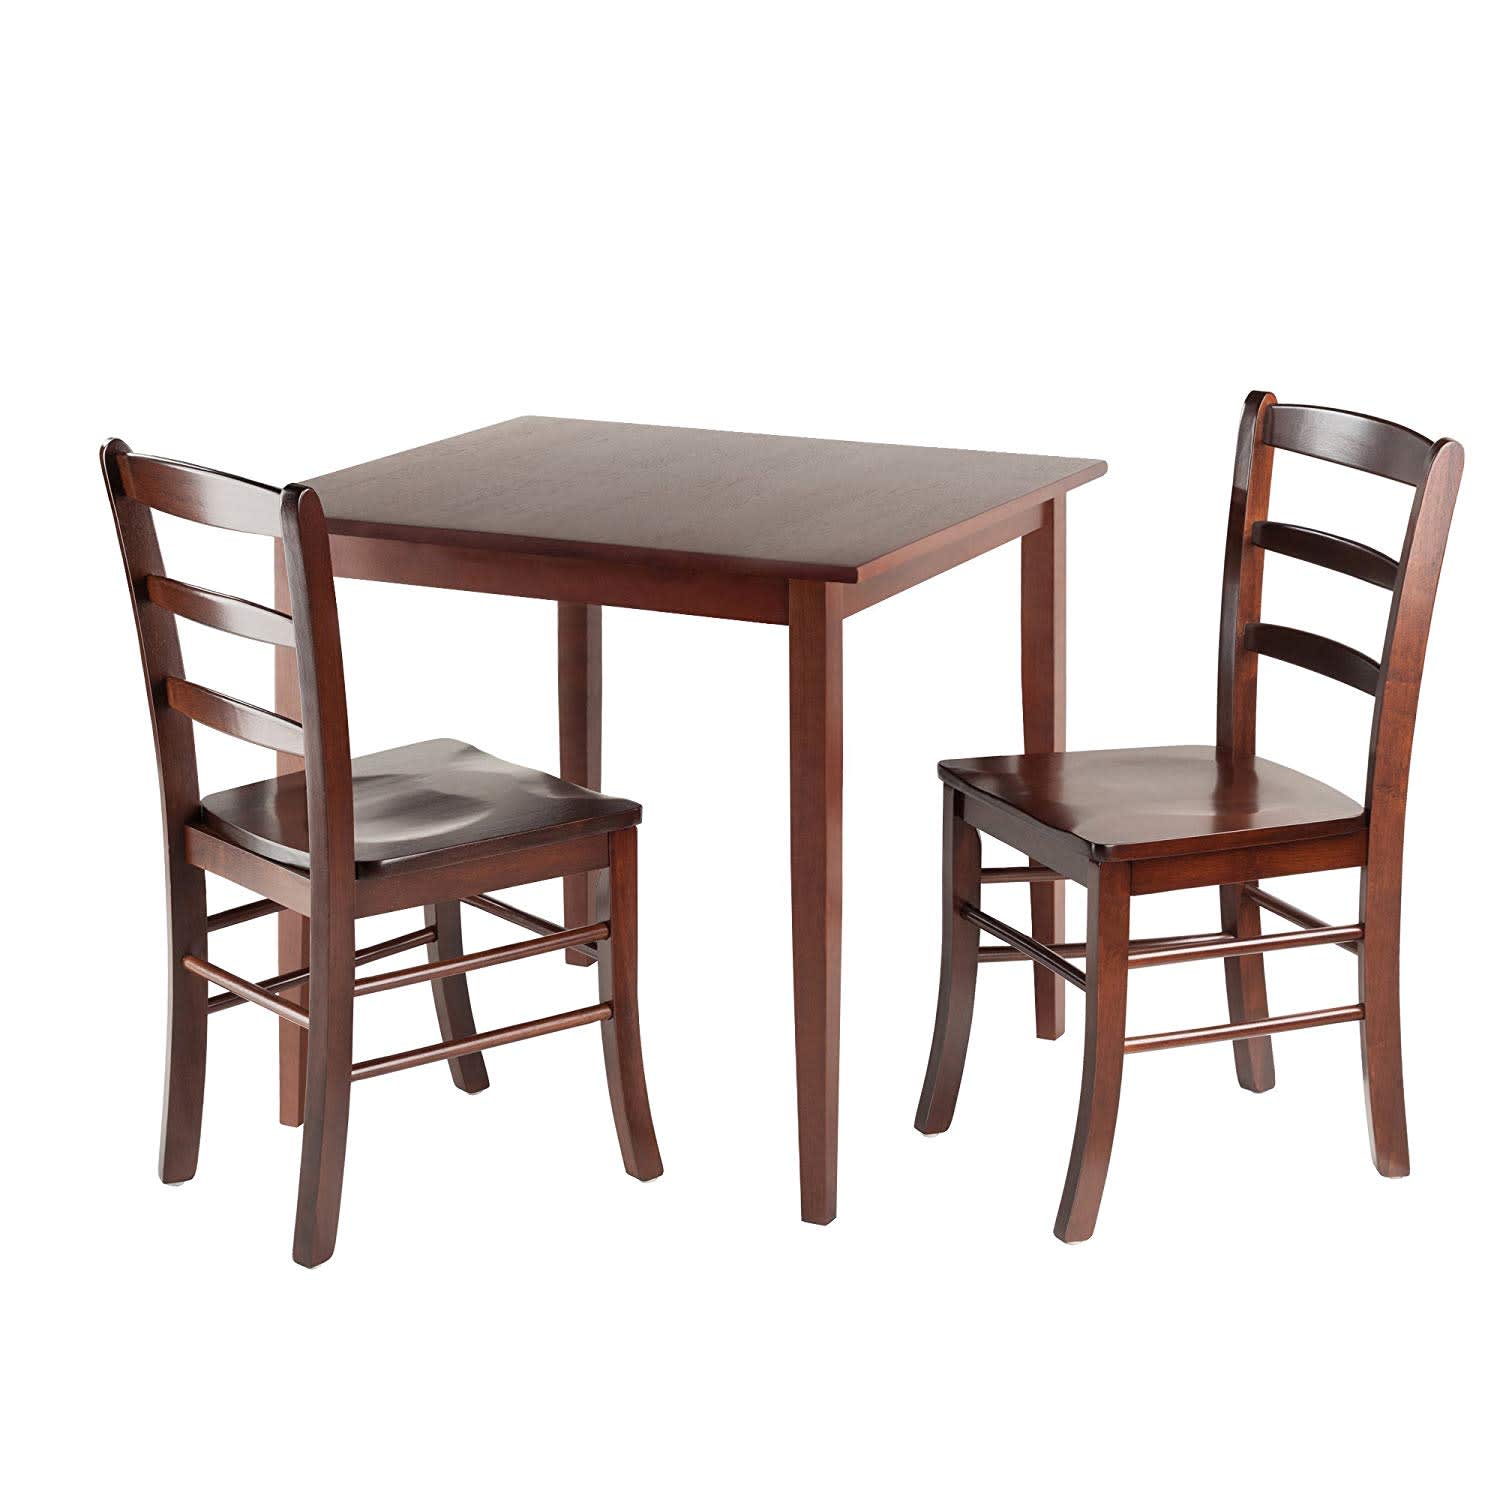 Small Table And Chairs Set / Industrial Table Chairs Set Dining Set Dining Table Small Dining Table : Maybe you would like to learn more about one of these?